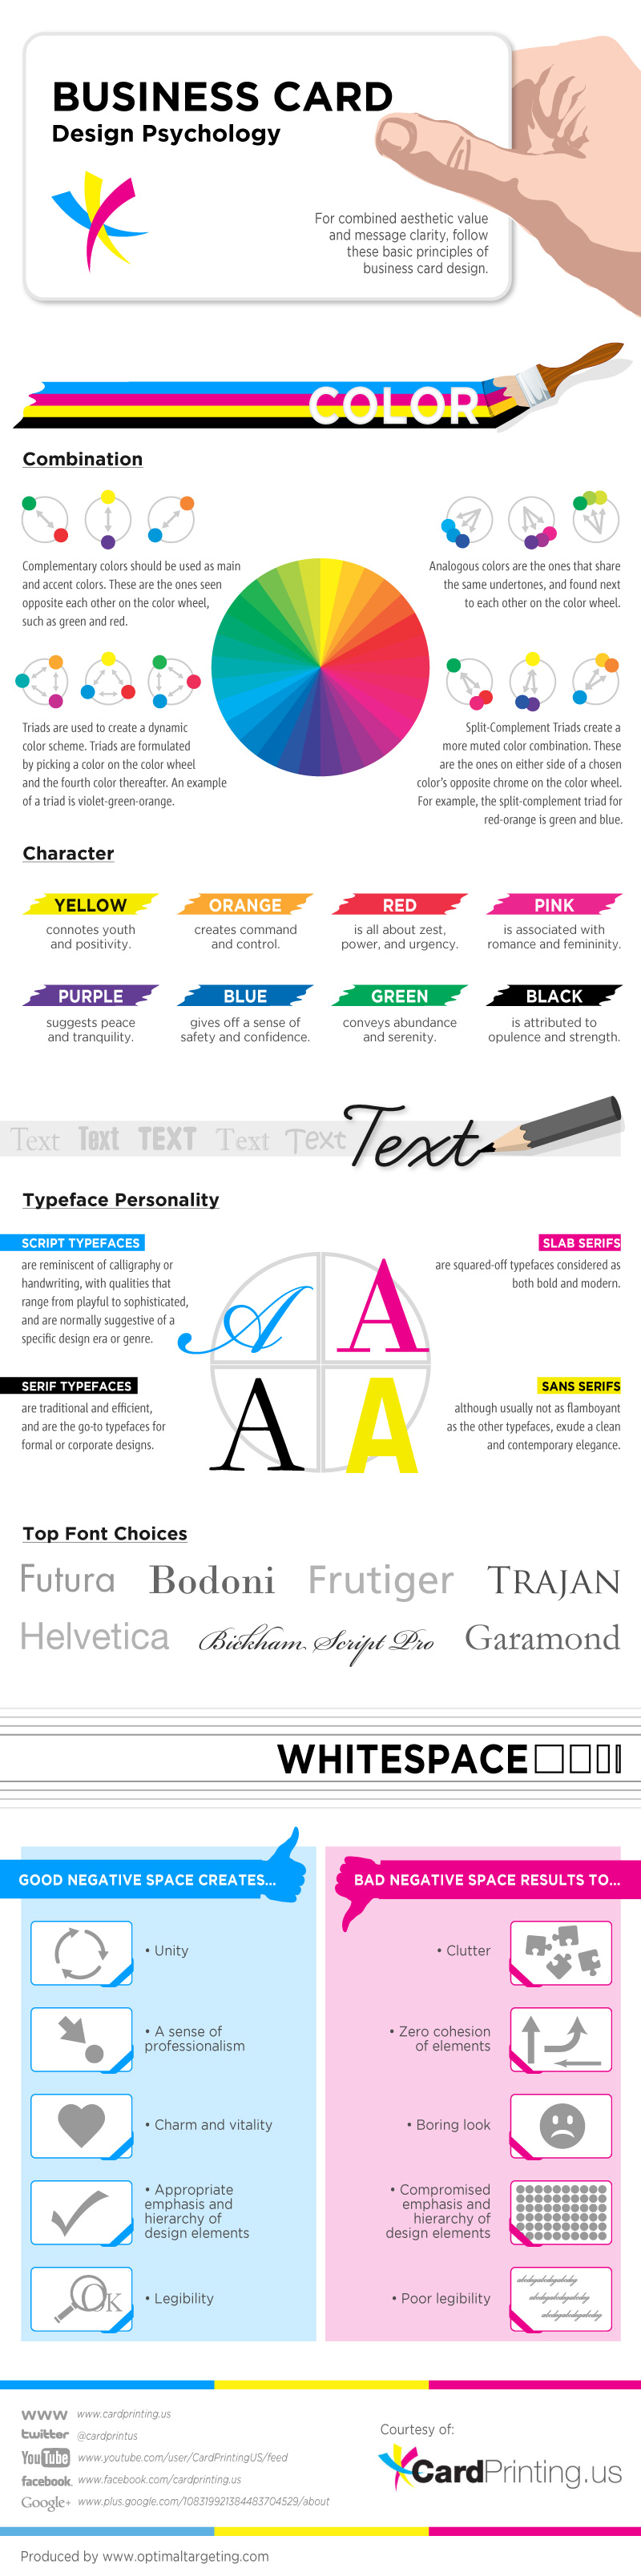 Business Card Psychology-Infographic